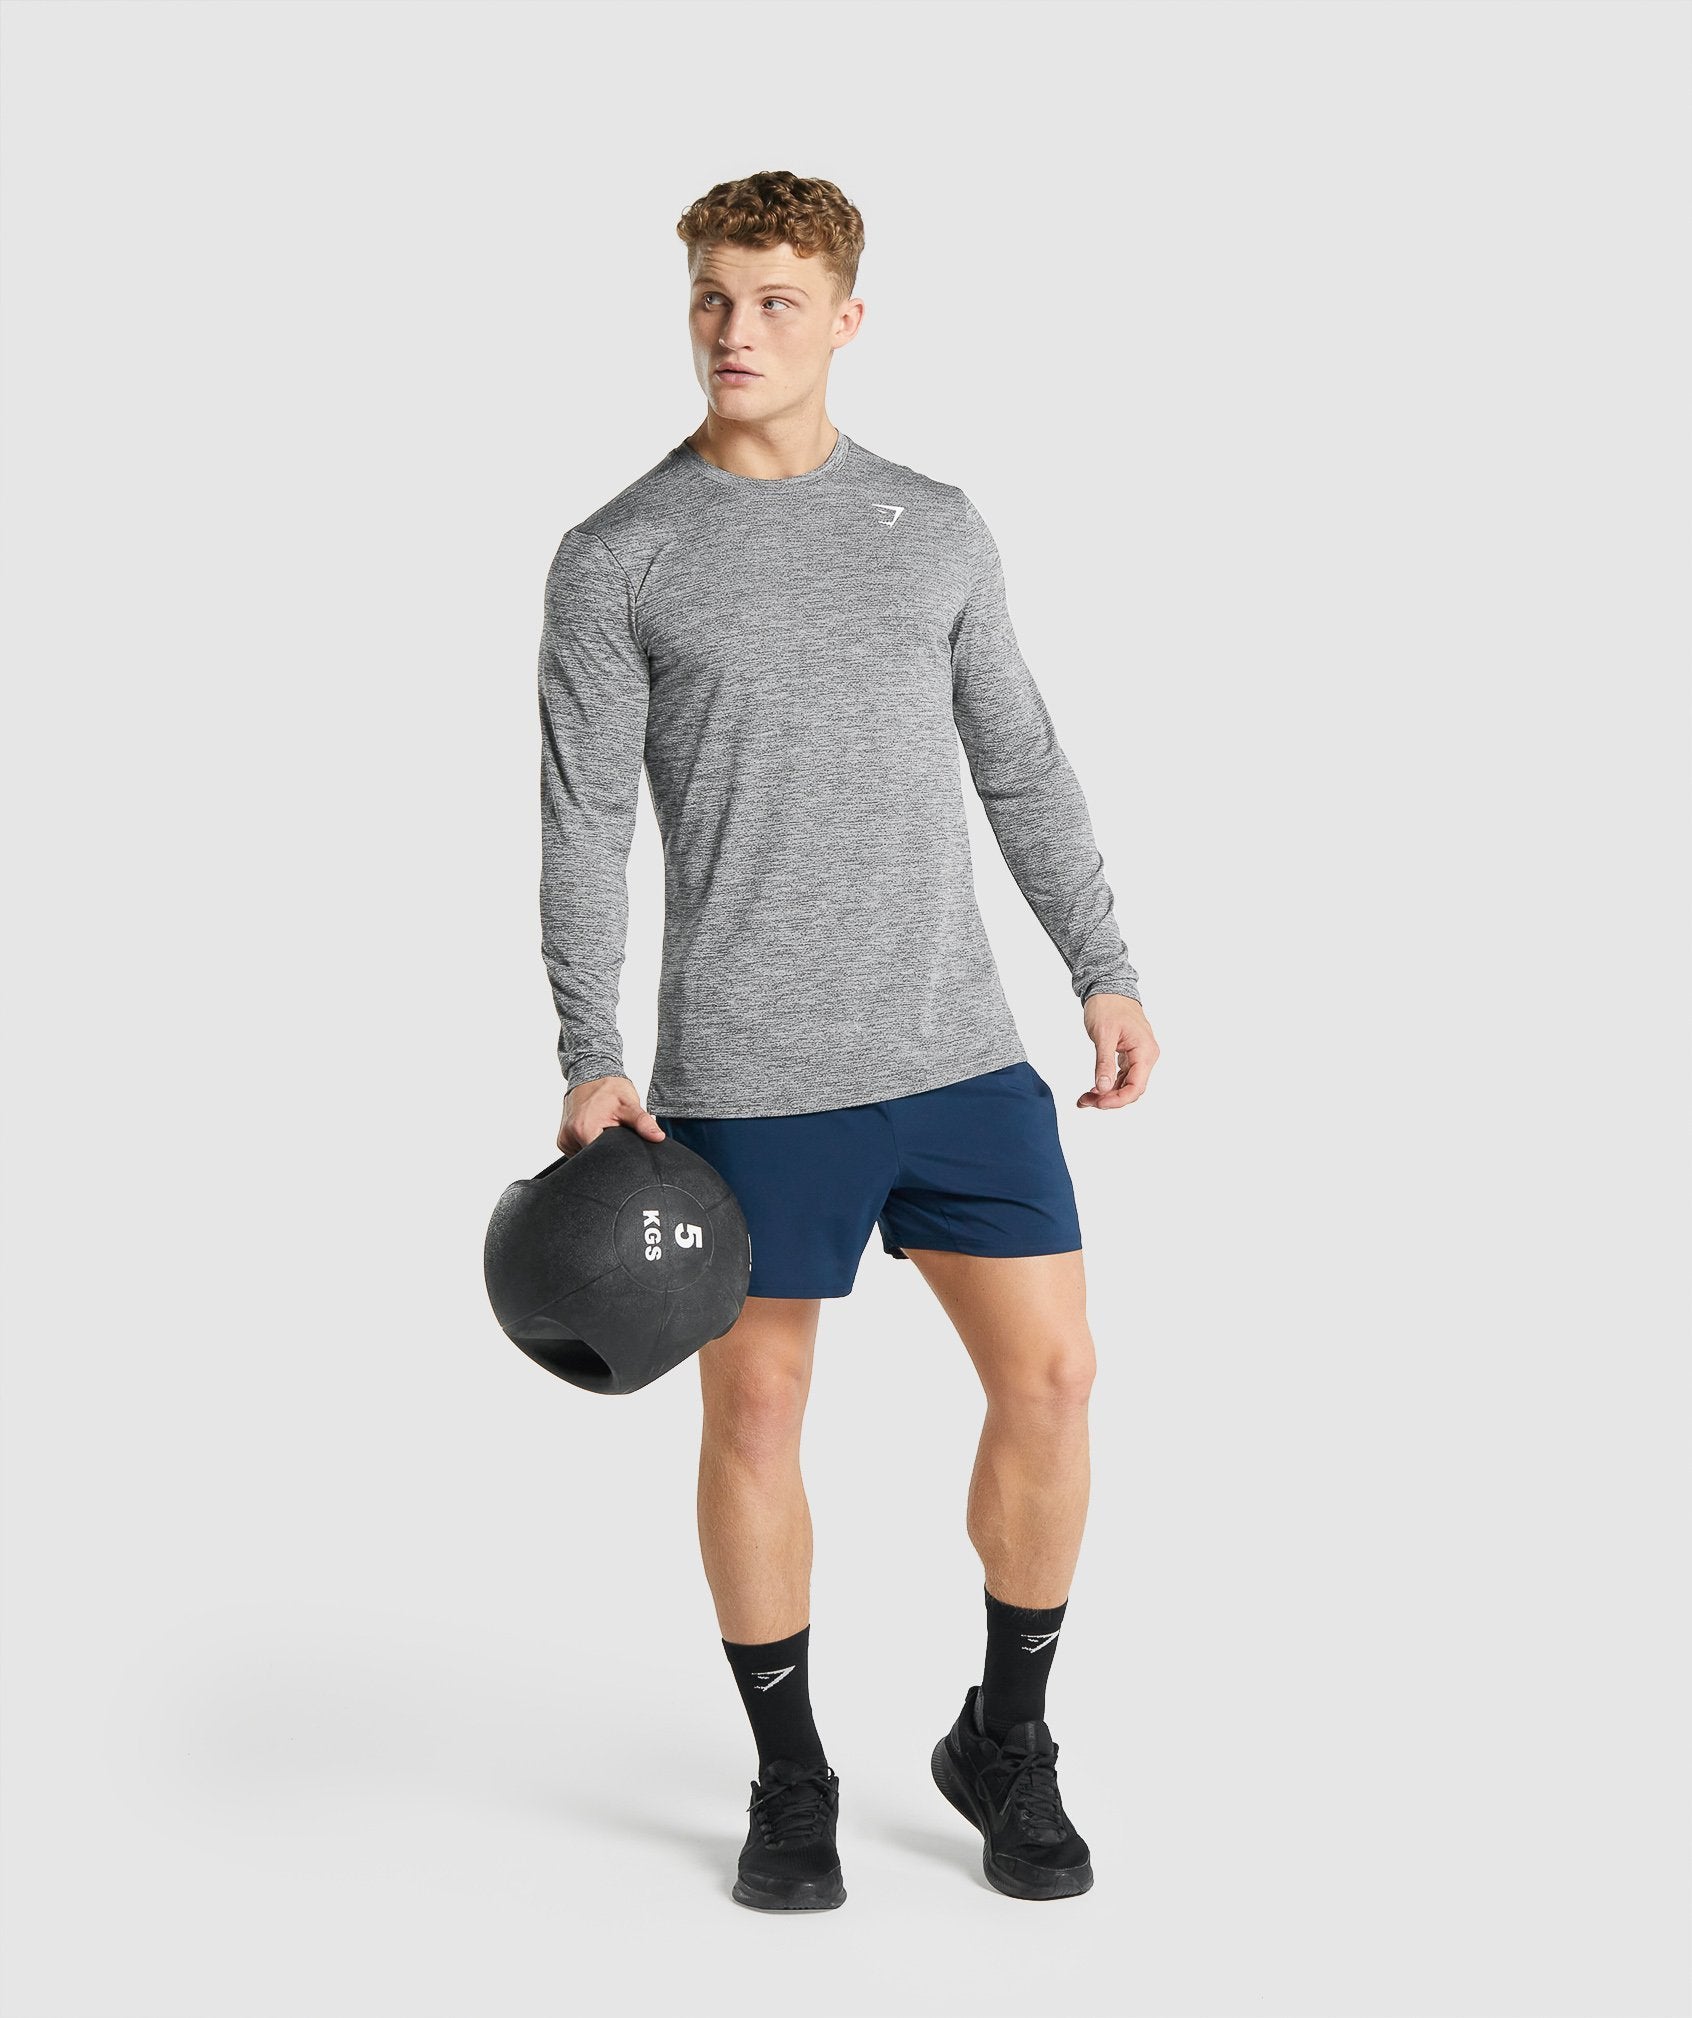 Arrival Marl Long Sleeve T-Shirt in Charcoal Marl - view 4